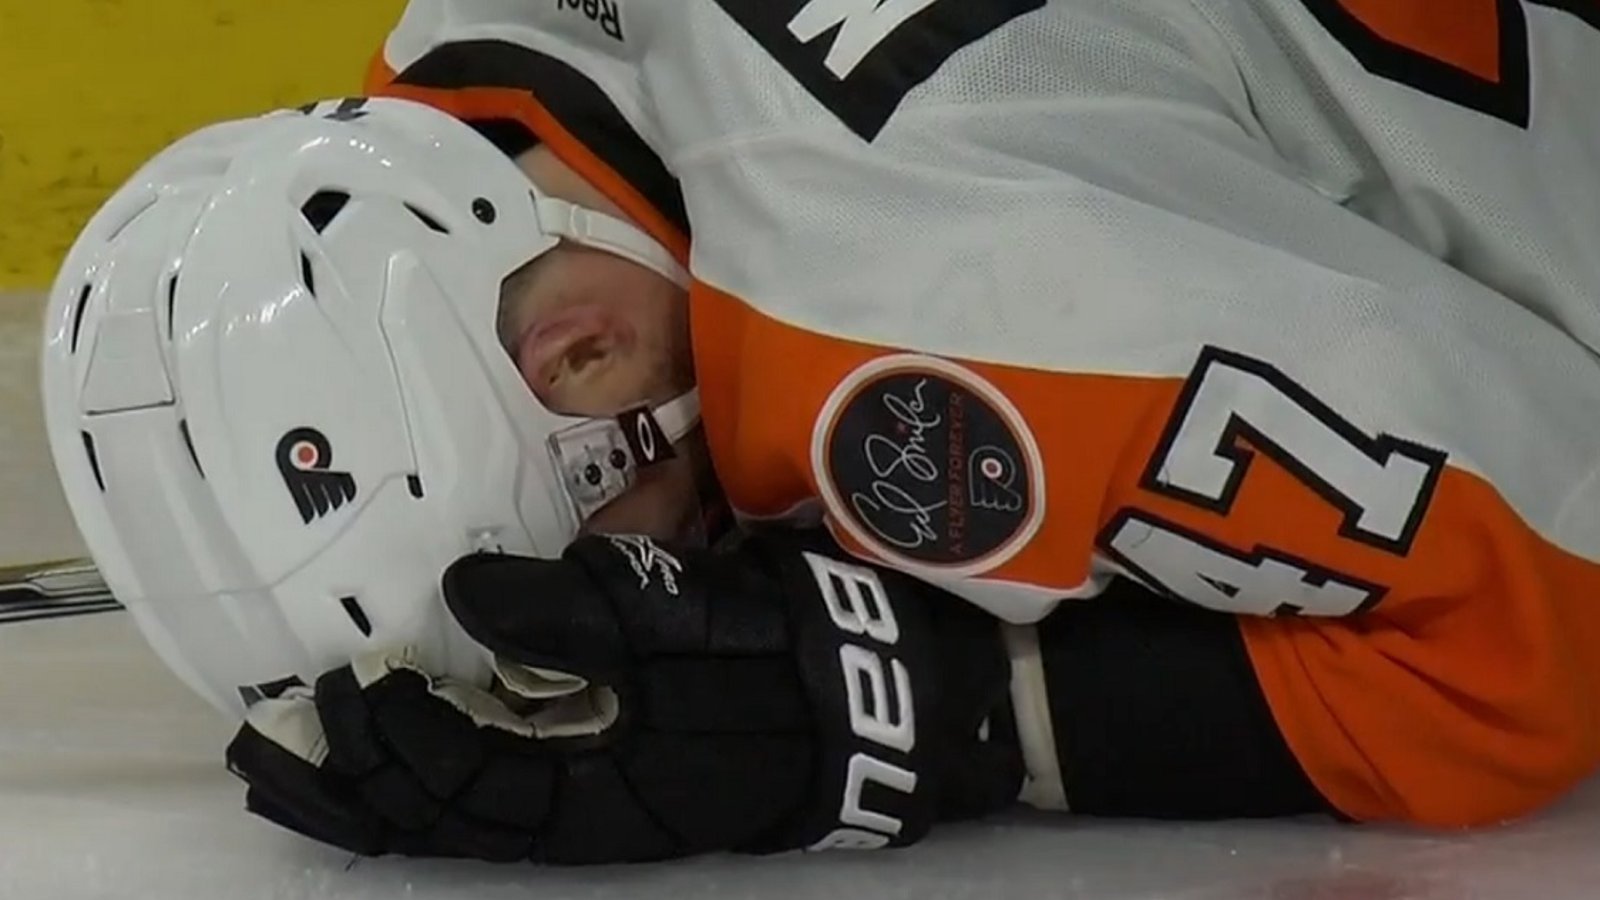 Defenseman sent to the quiet room after taking a nasty shot to the head.